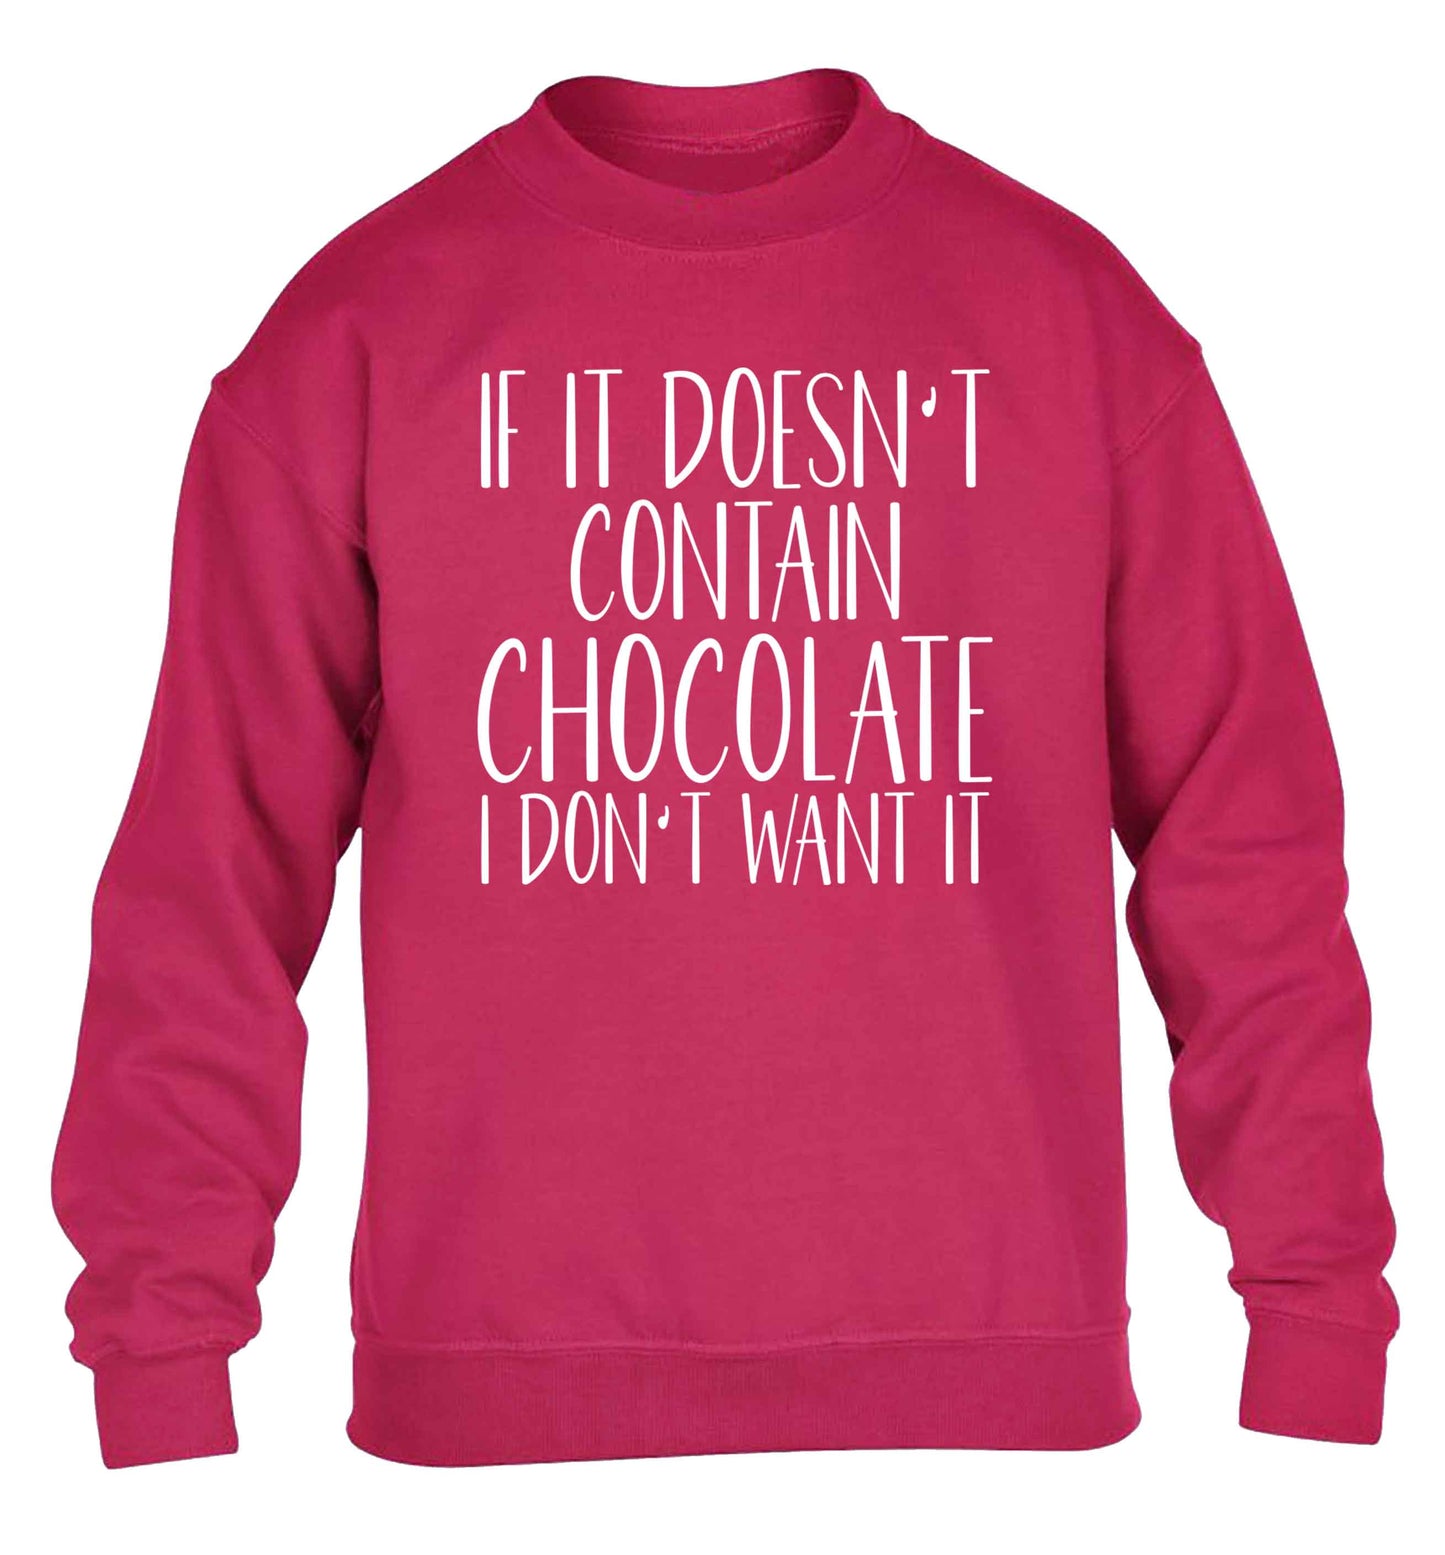 If it doesn't contain chocolate I don't want it children's pink sweater 12-13 Years